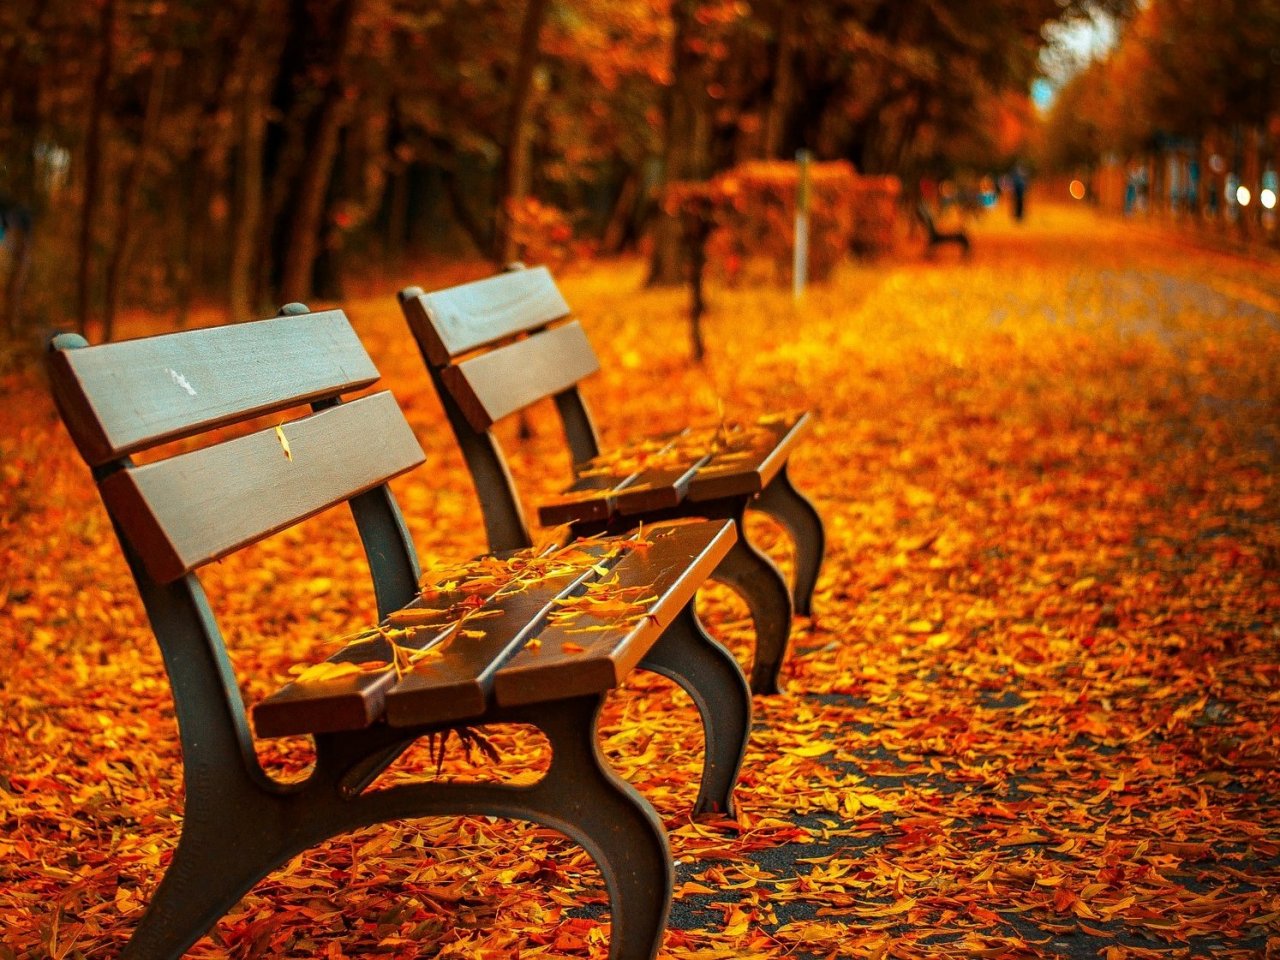 Autumn in the park jigsaw puzzle